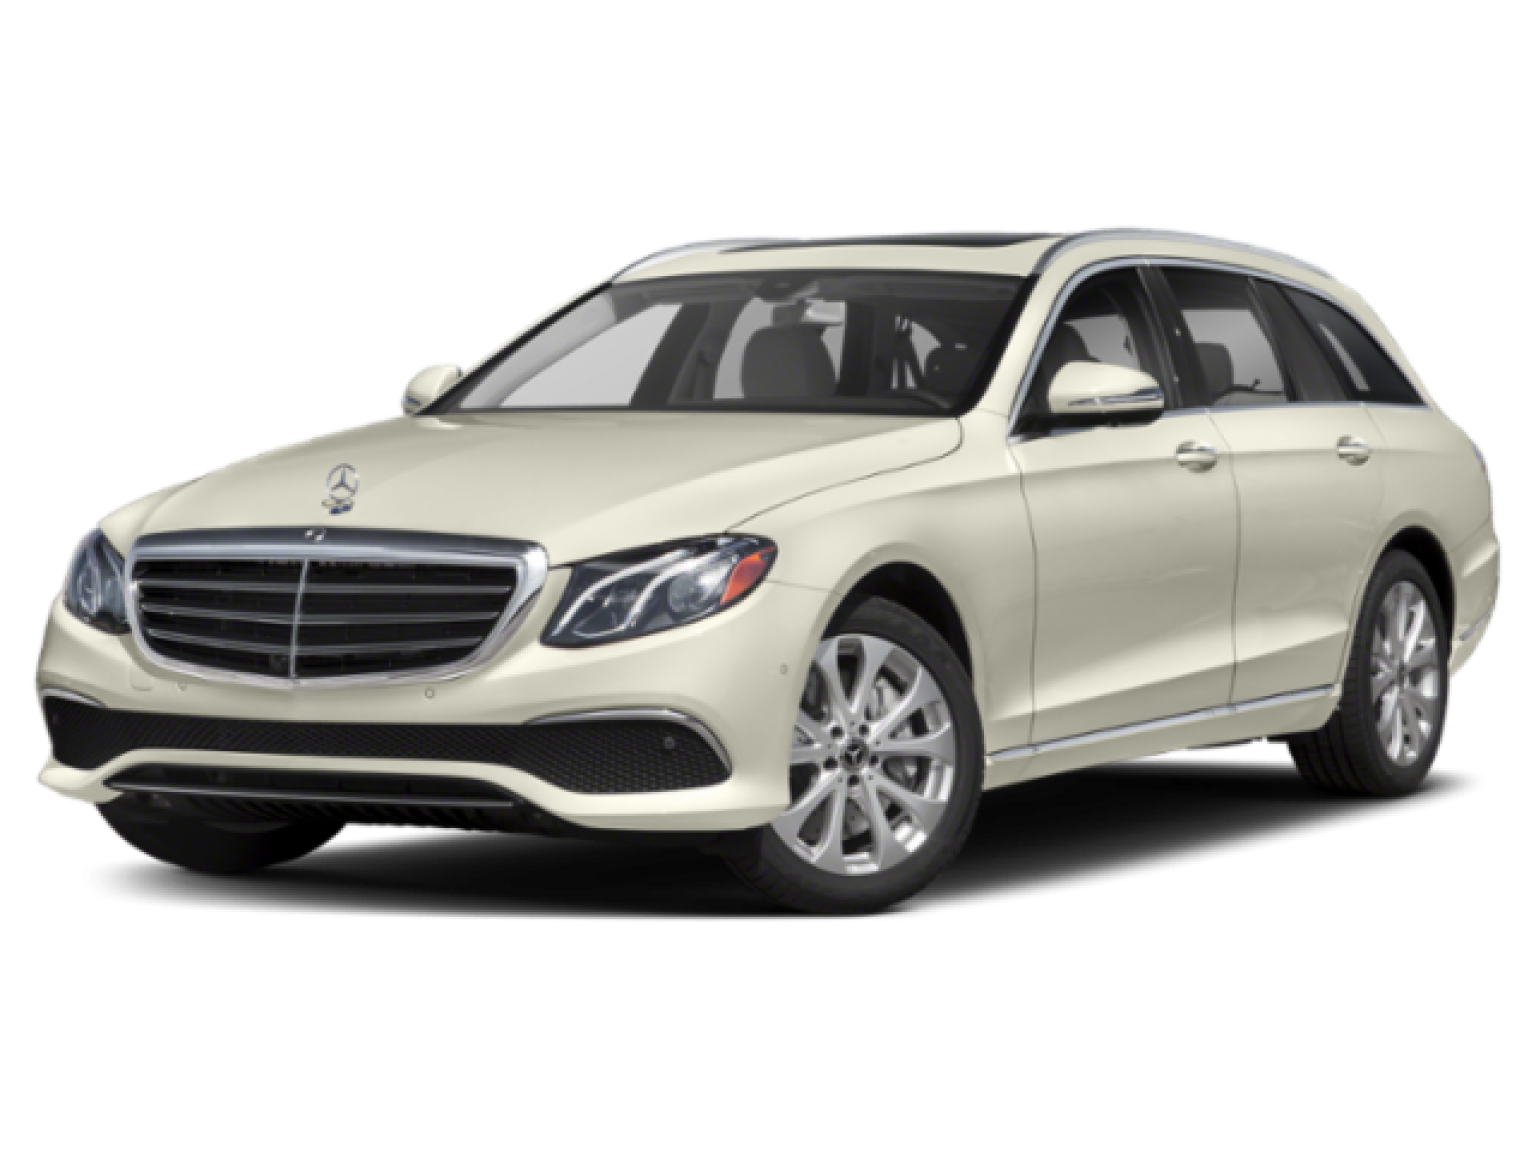  Mercedes-Benz E450 oem parts and accessories on sale